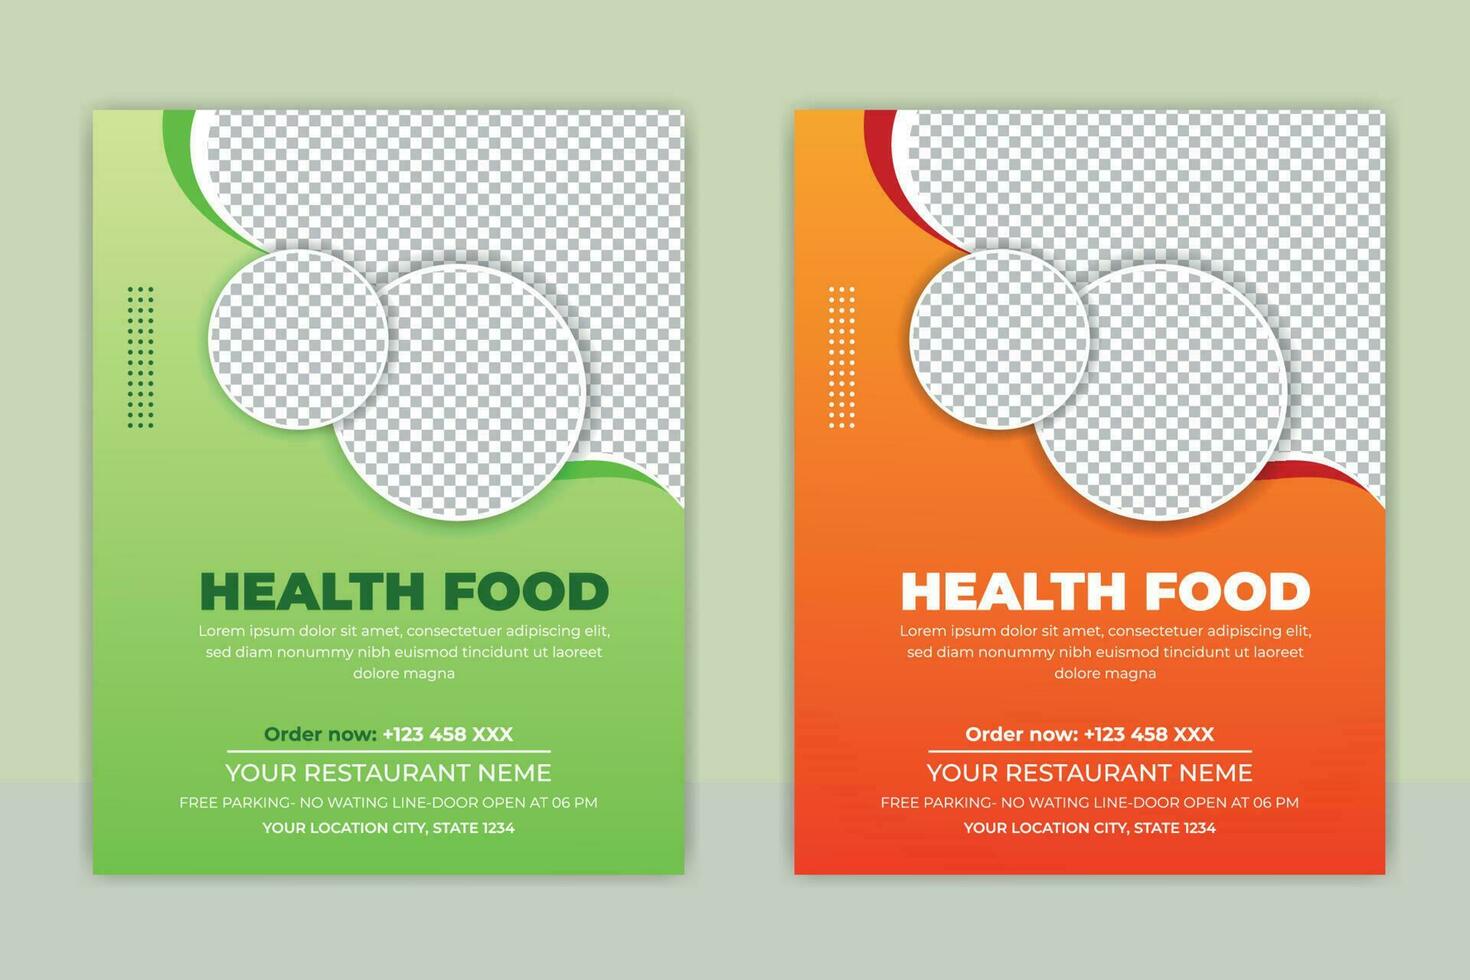 Food Flyer A4 size Vector Template. Fast Food Flyer Design Template cooking, cafe and restaurant menu, food ordering, junk food.